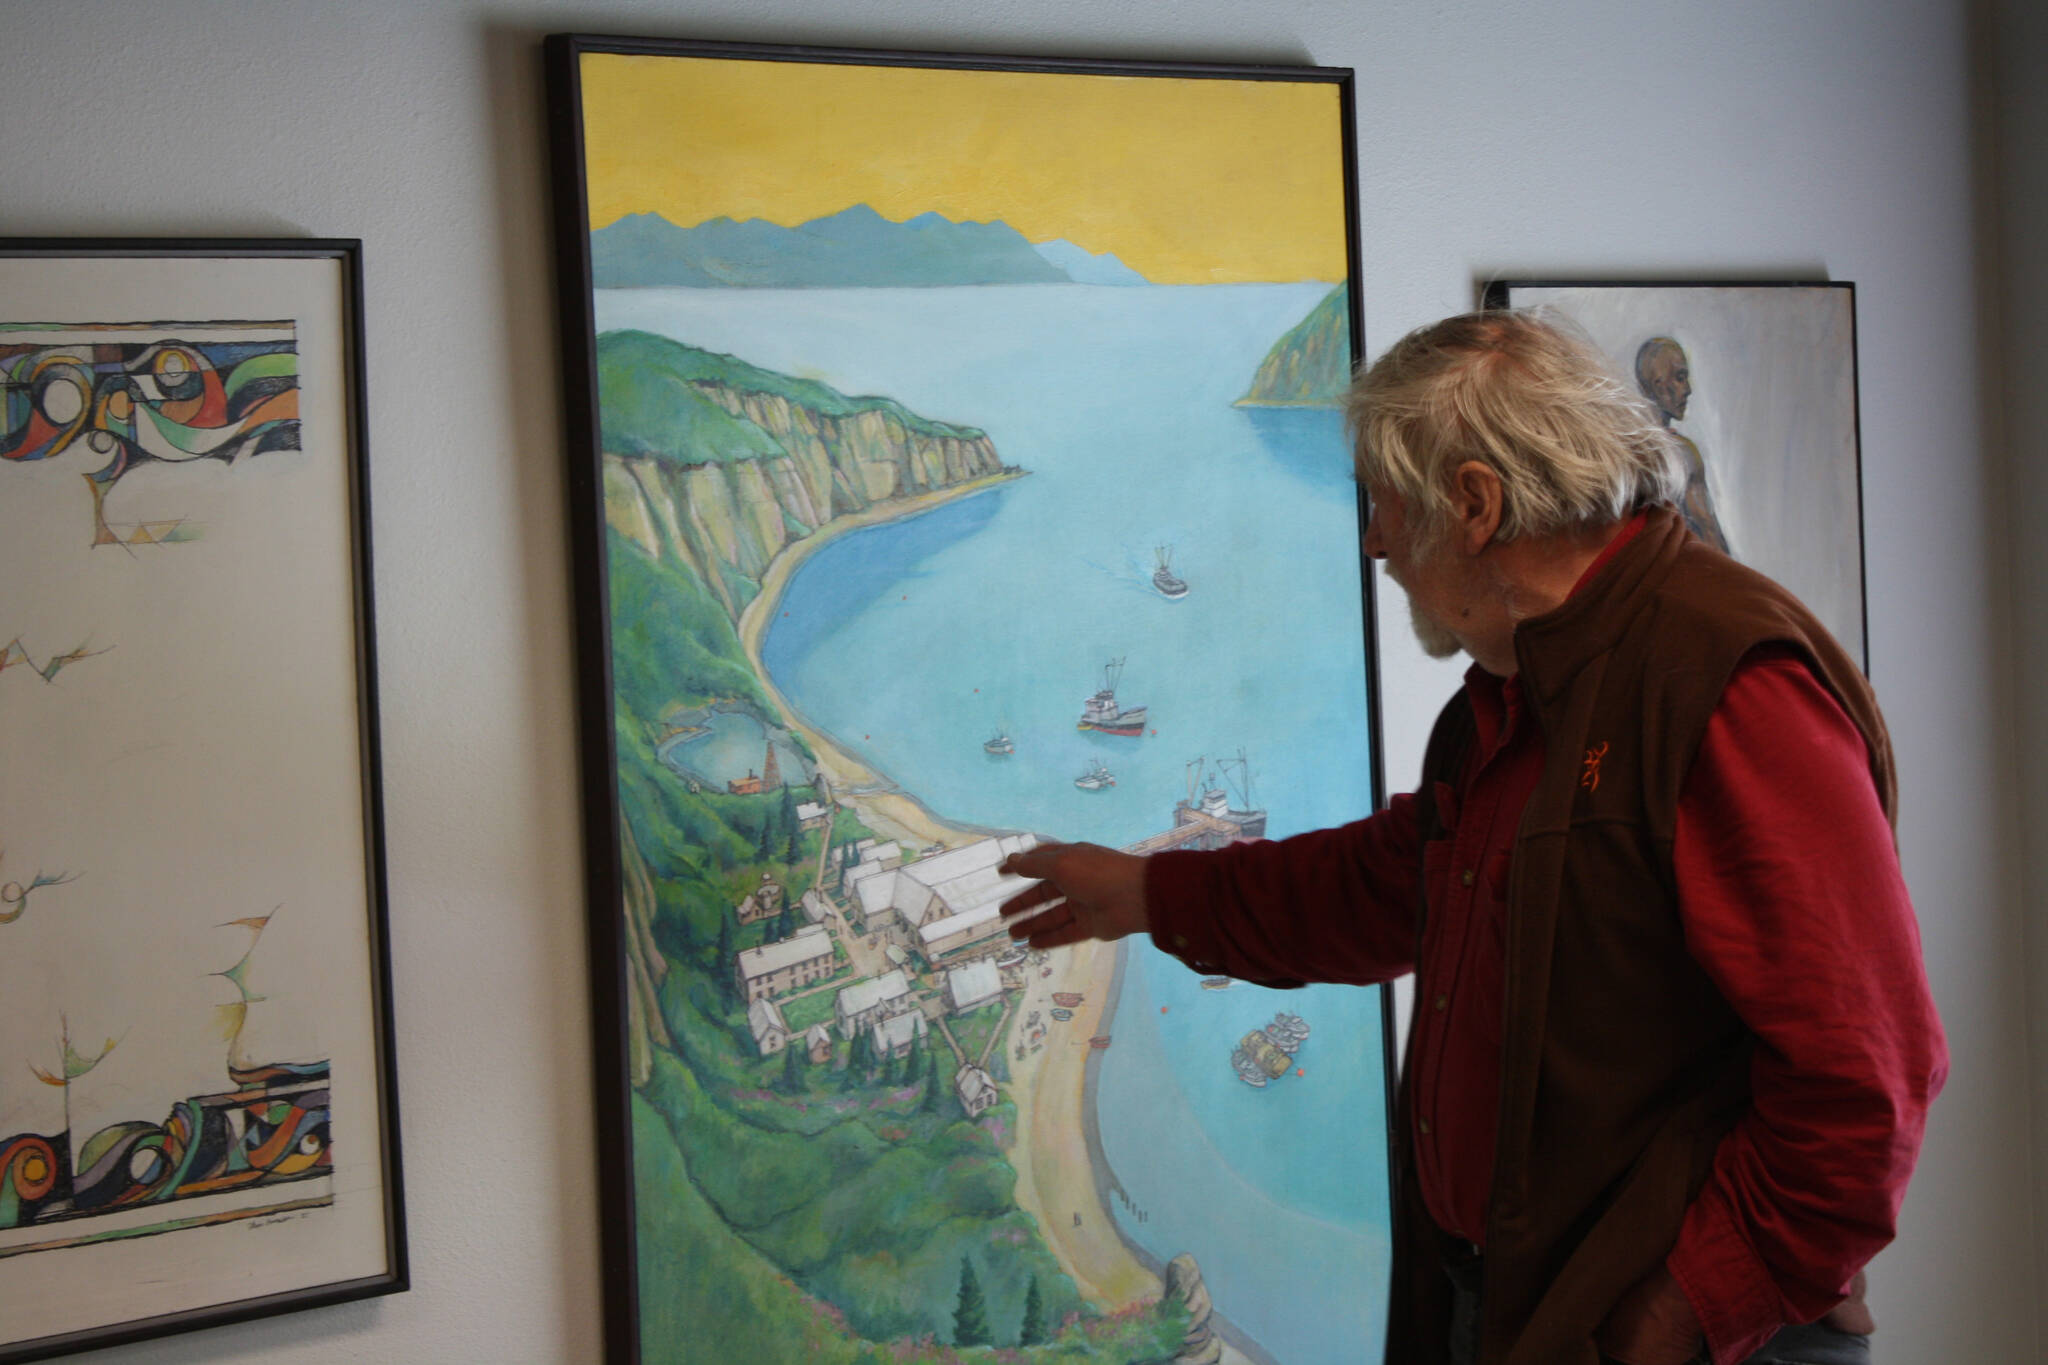 Thor Evenson gets an early look at his exibition at the Kenai Art Center on Tuesday, May 31, 2022. (Camille Botello/Peninsula Clarion)